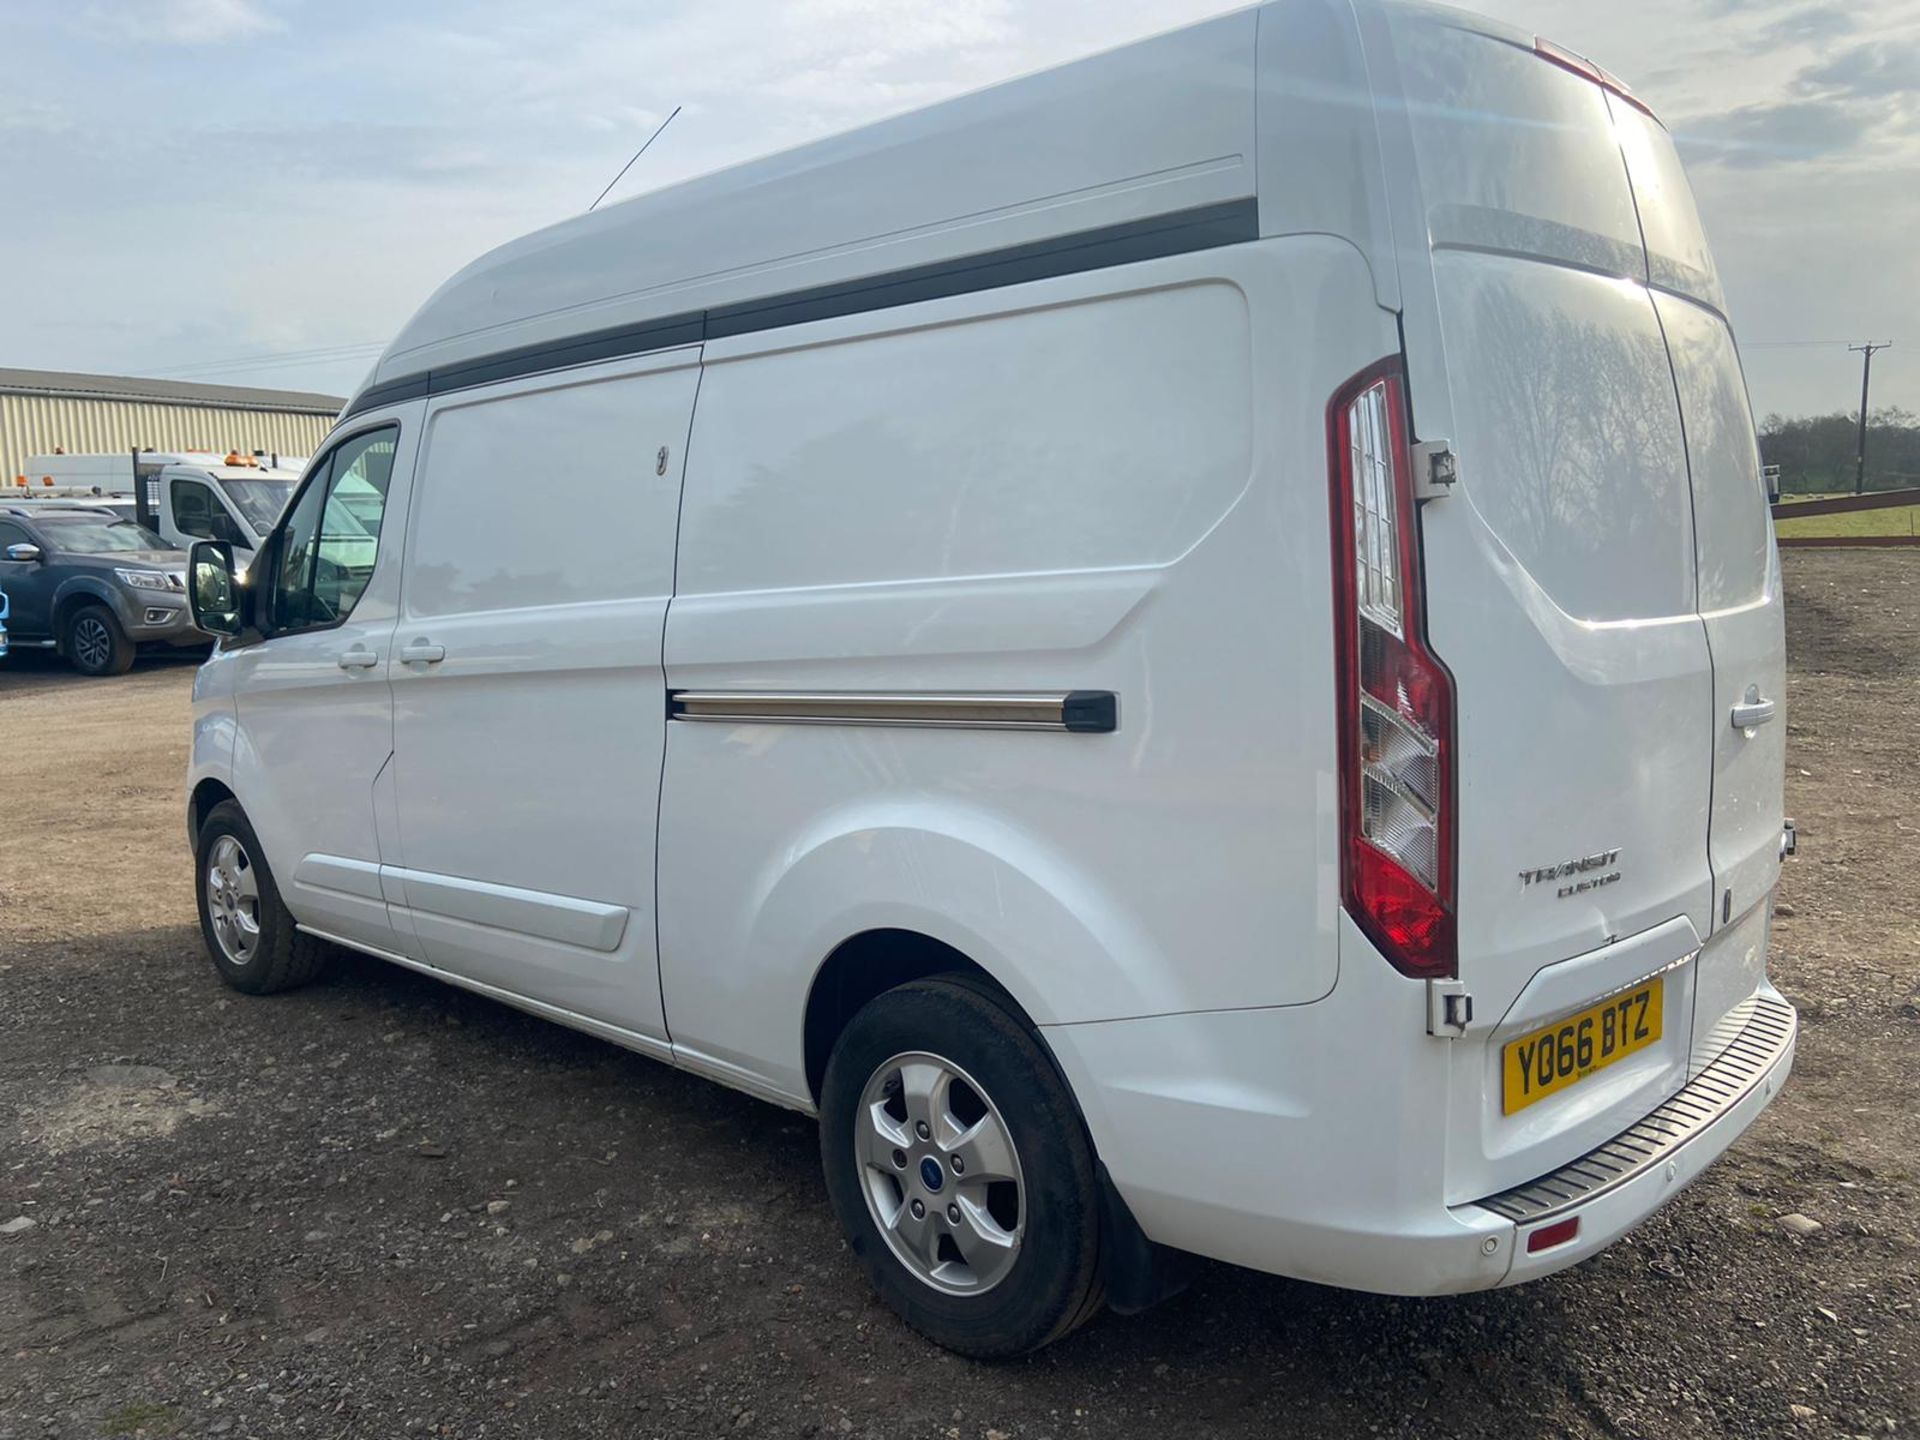 2017 (66) FORD TRANSIT CUSTOM 290 LIMITED, HEATED DRIVES SEATS, AIR CON *PLUS VAT* - Image 5 of 10